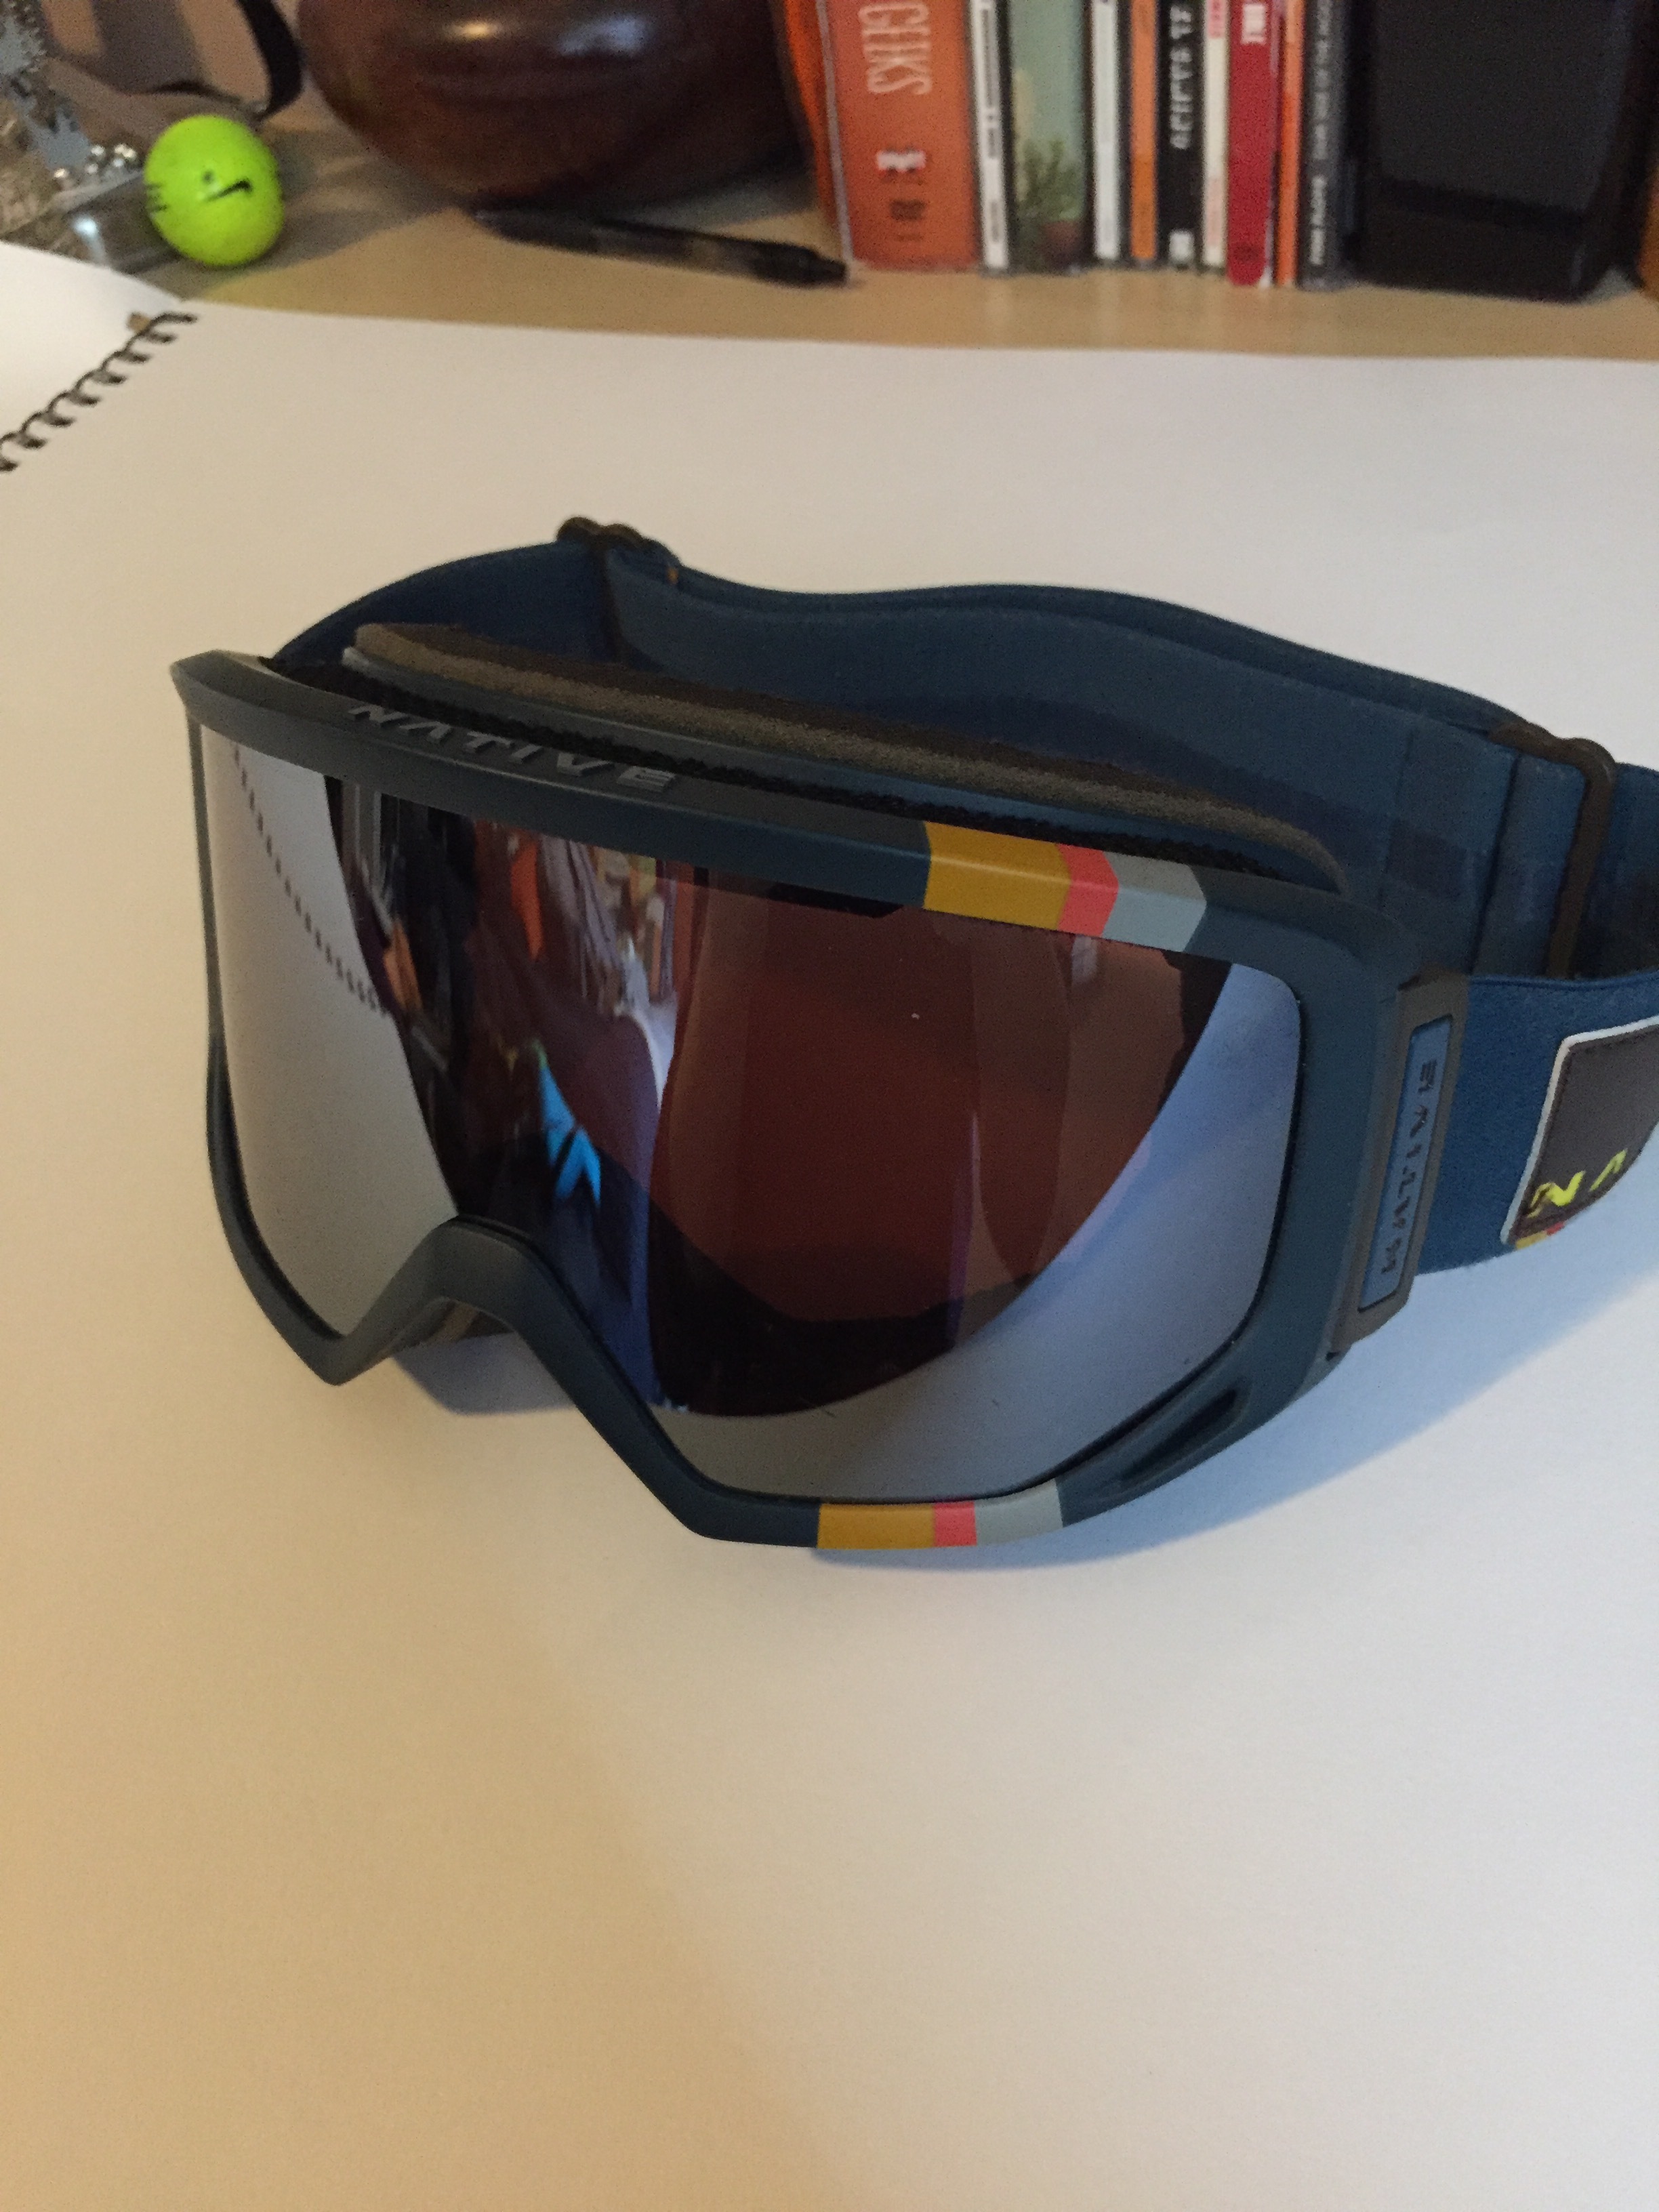 GOGGLES FOR SALE - Sell and Trade - Newschoolers.com